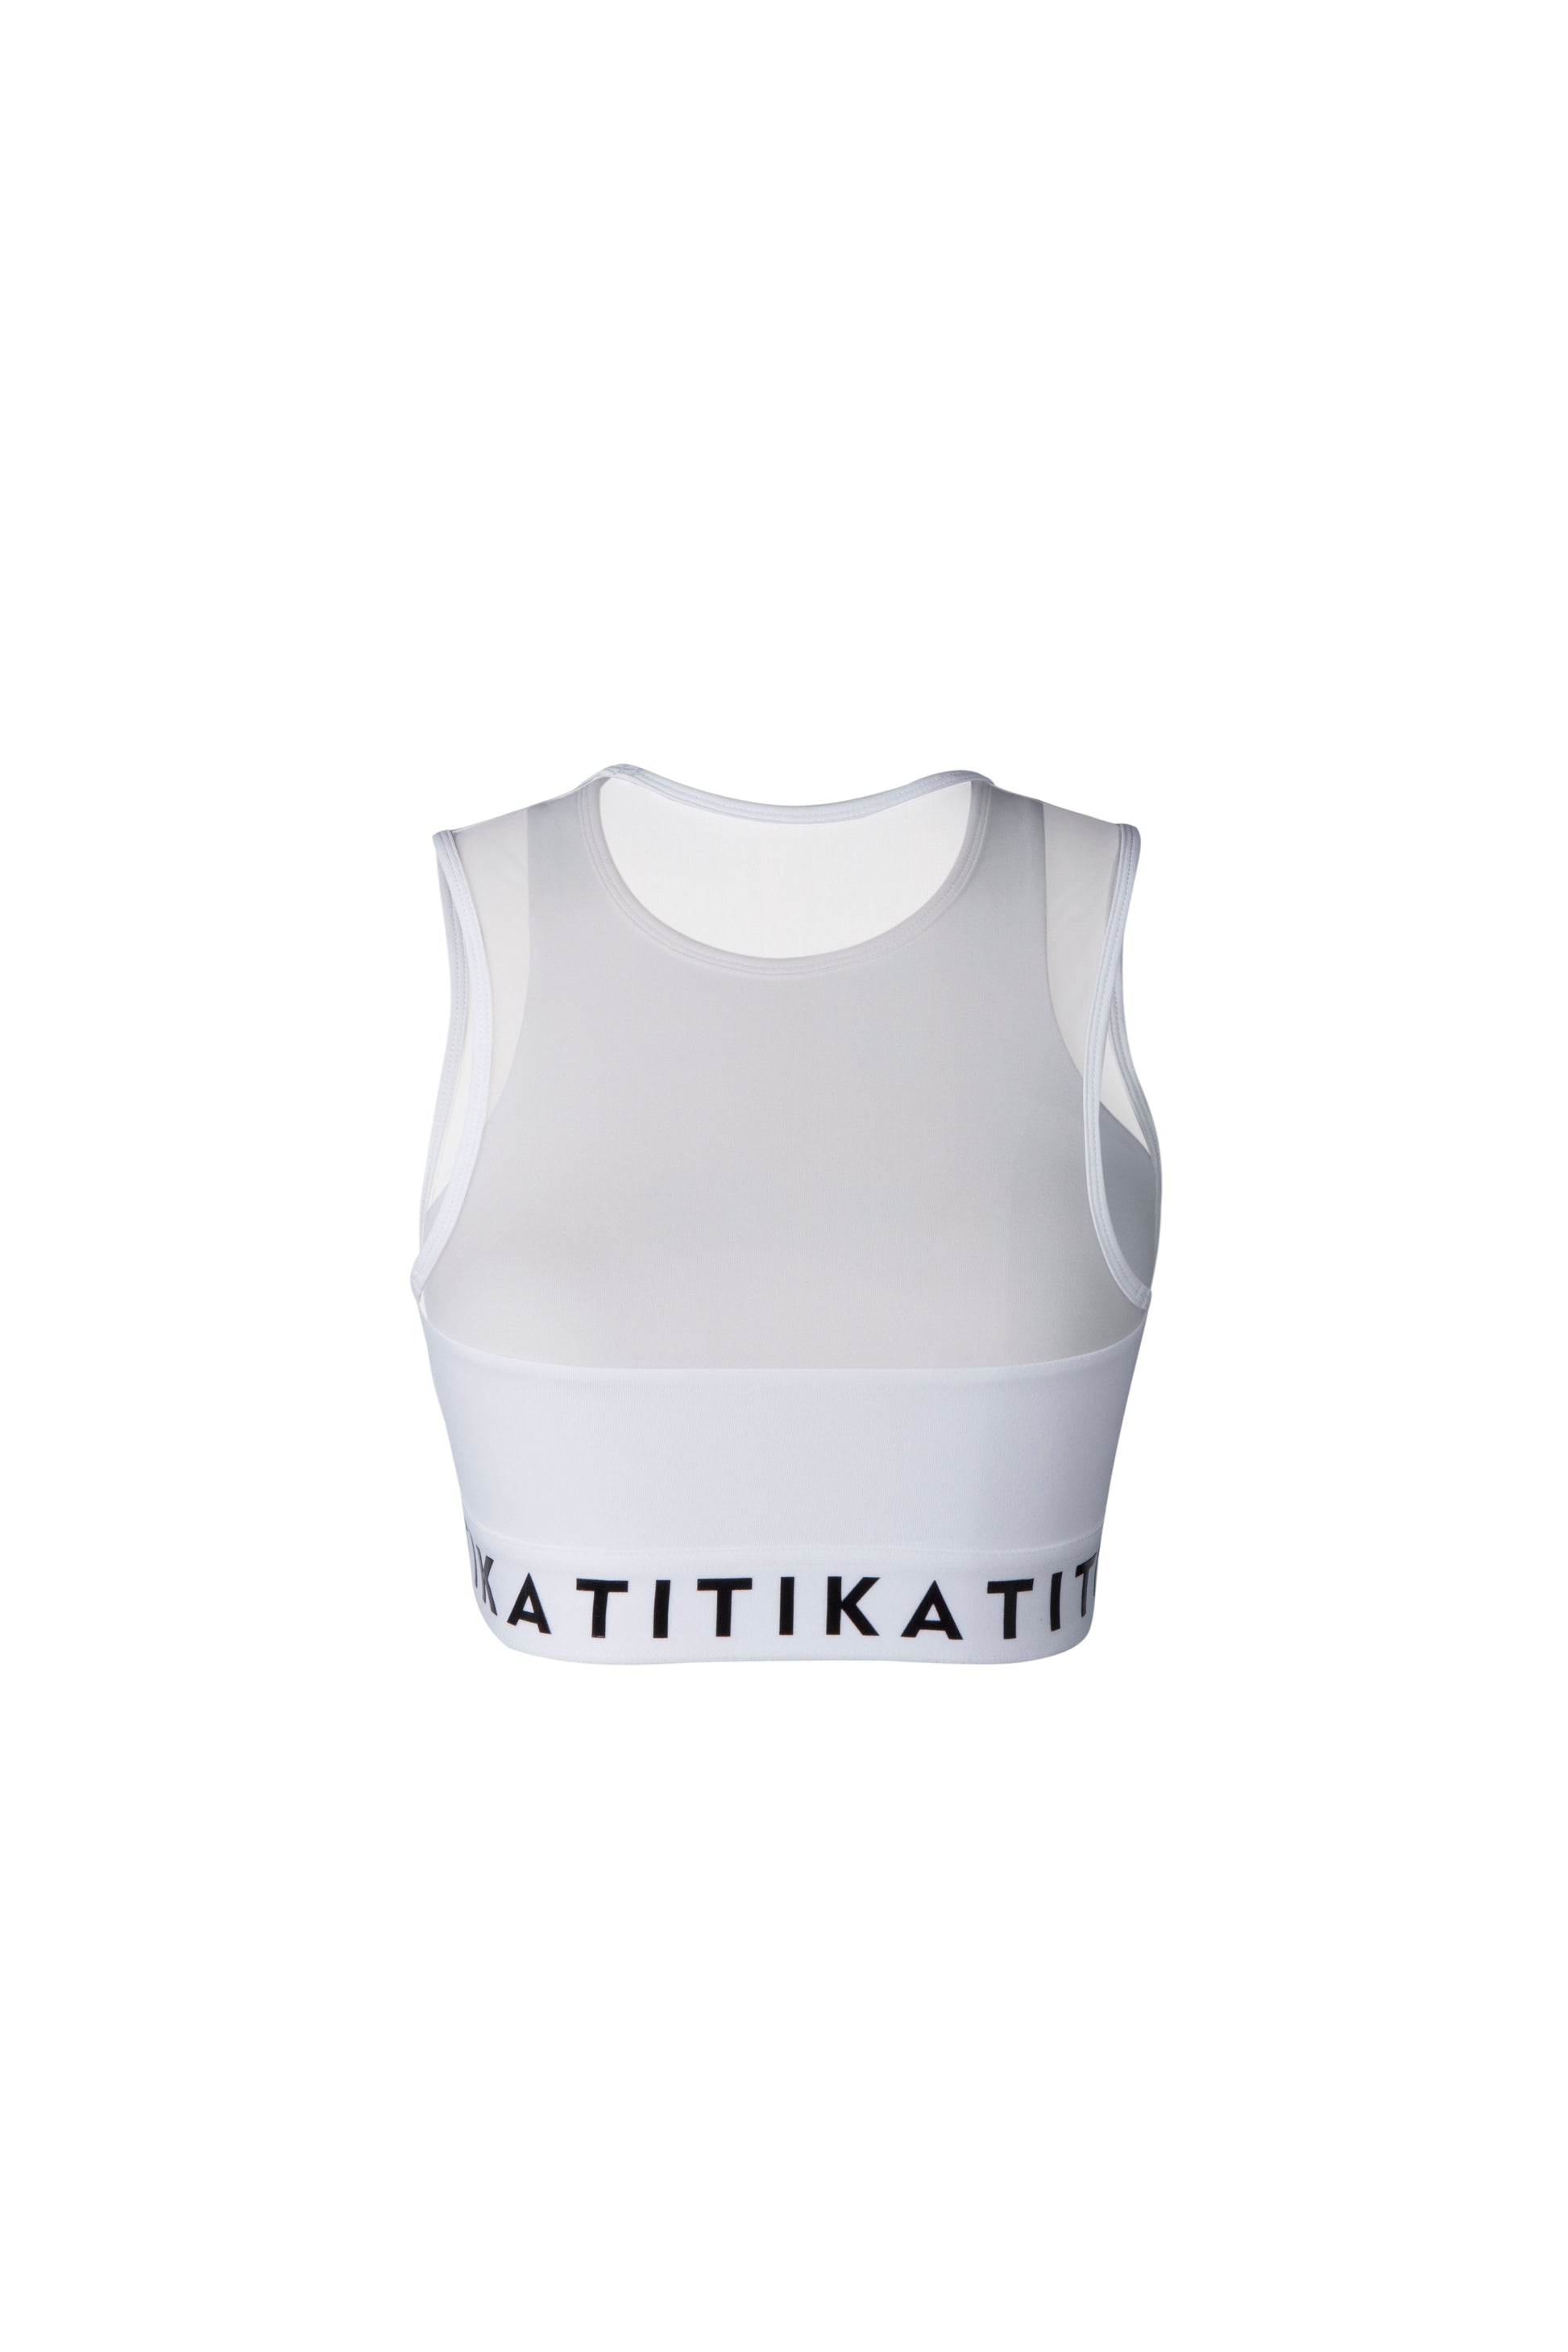 Gatten Medium Impact Bra in white for women. Features a sleek design with adjustable straps, a supportive underband, and medium-impact support, perfect for workouts and active wear.”